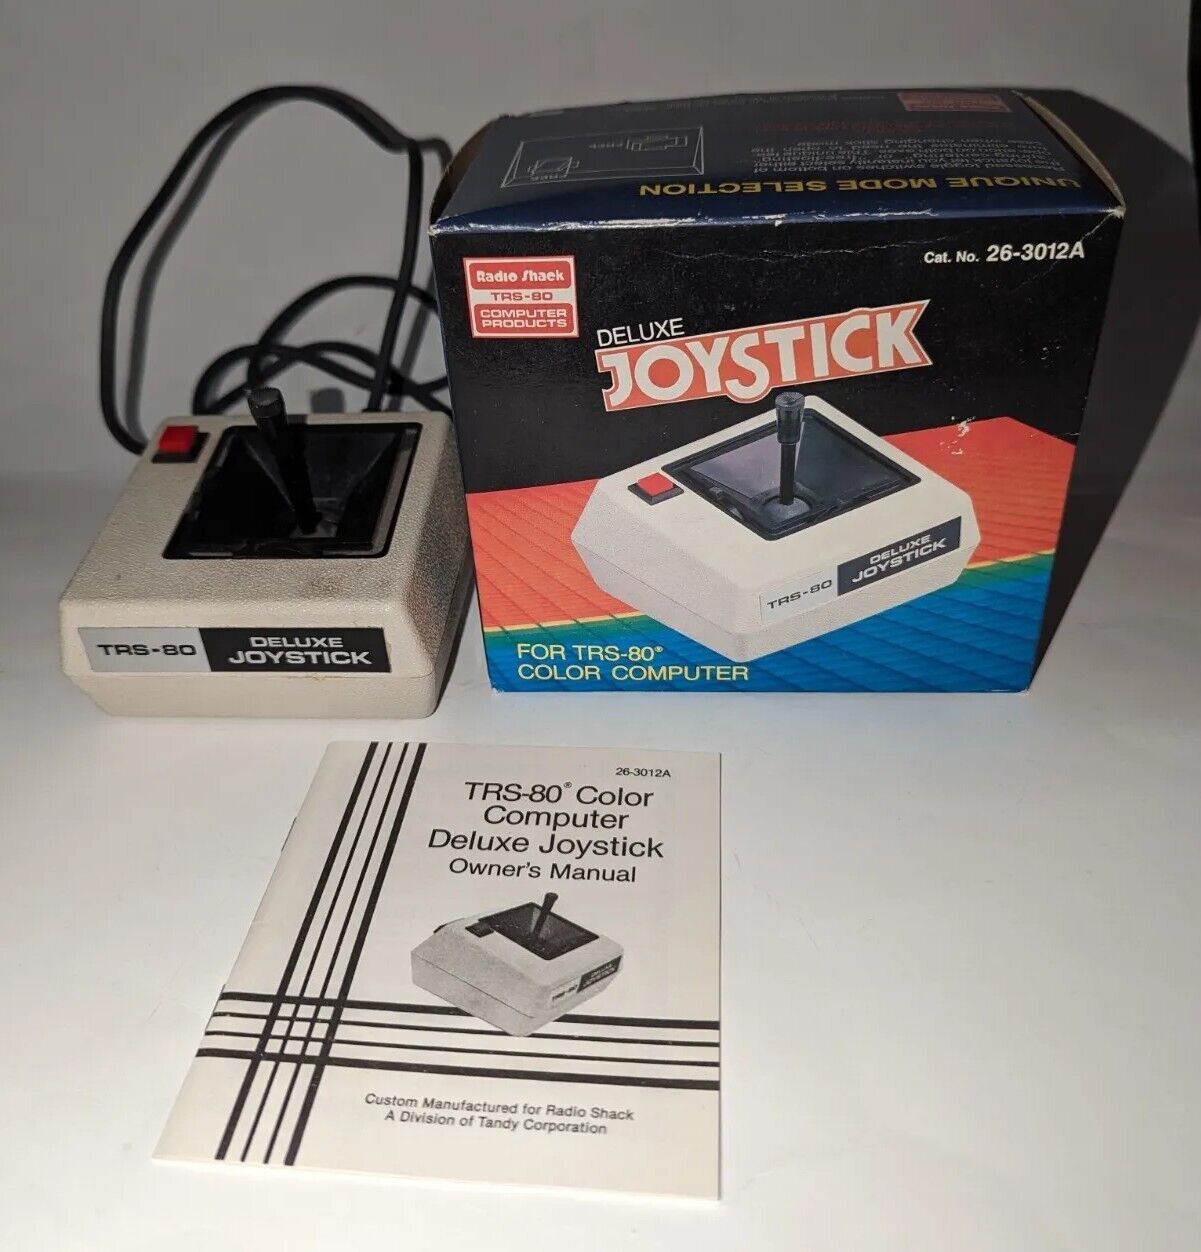 Tandy TRS-80 Deluxe Joystick CoCo Color Computer Tested In Box Controller CIB